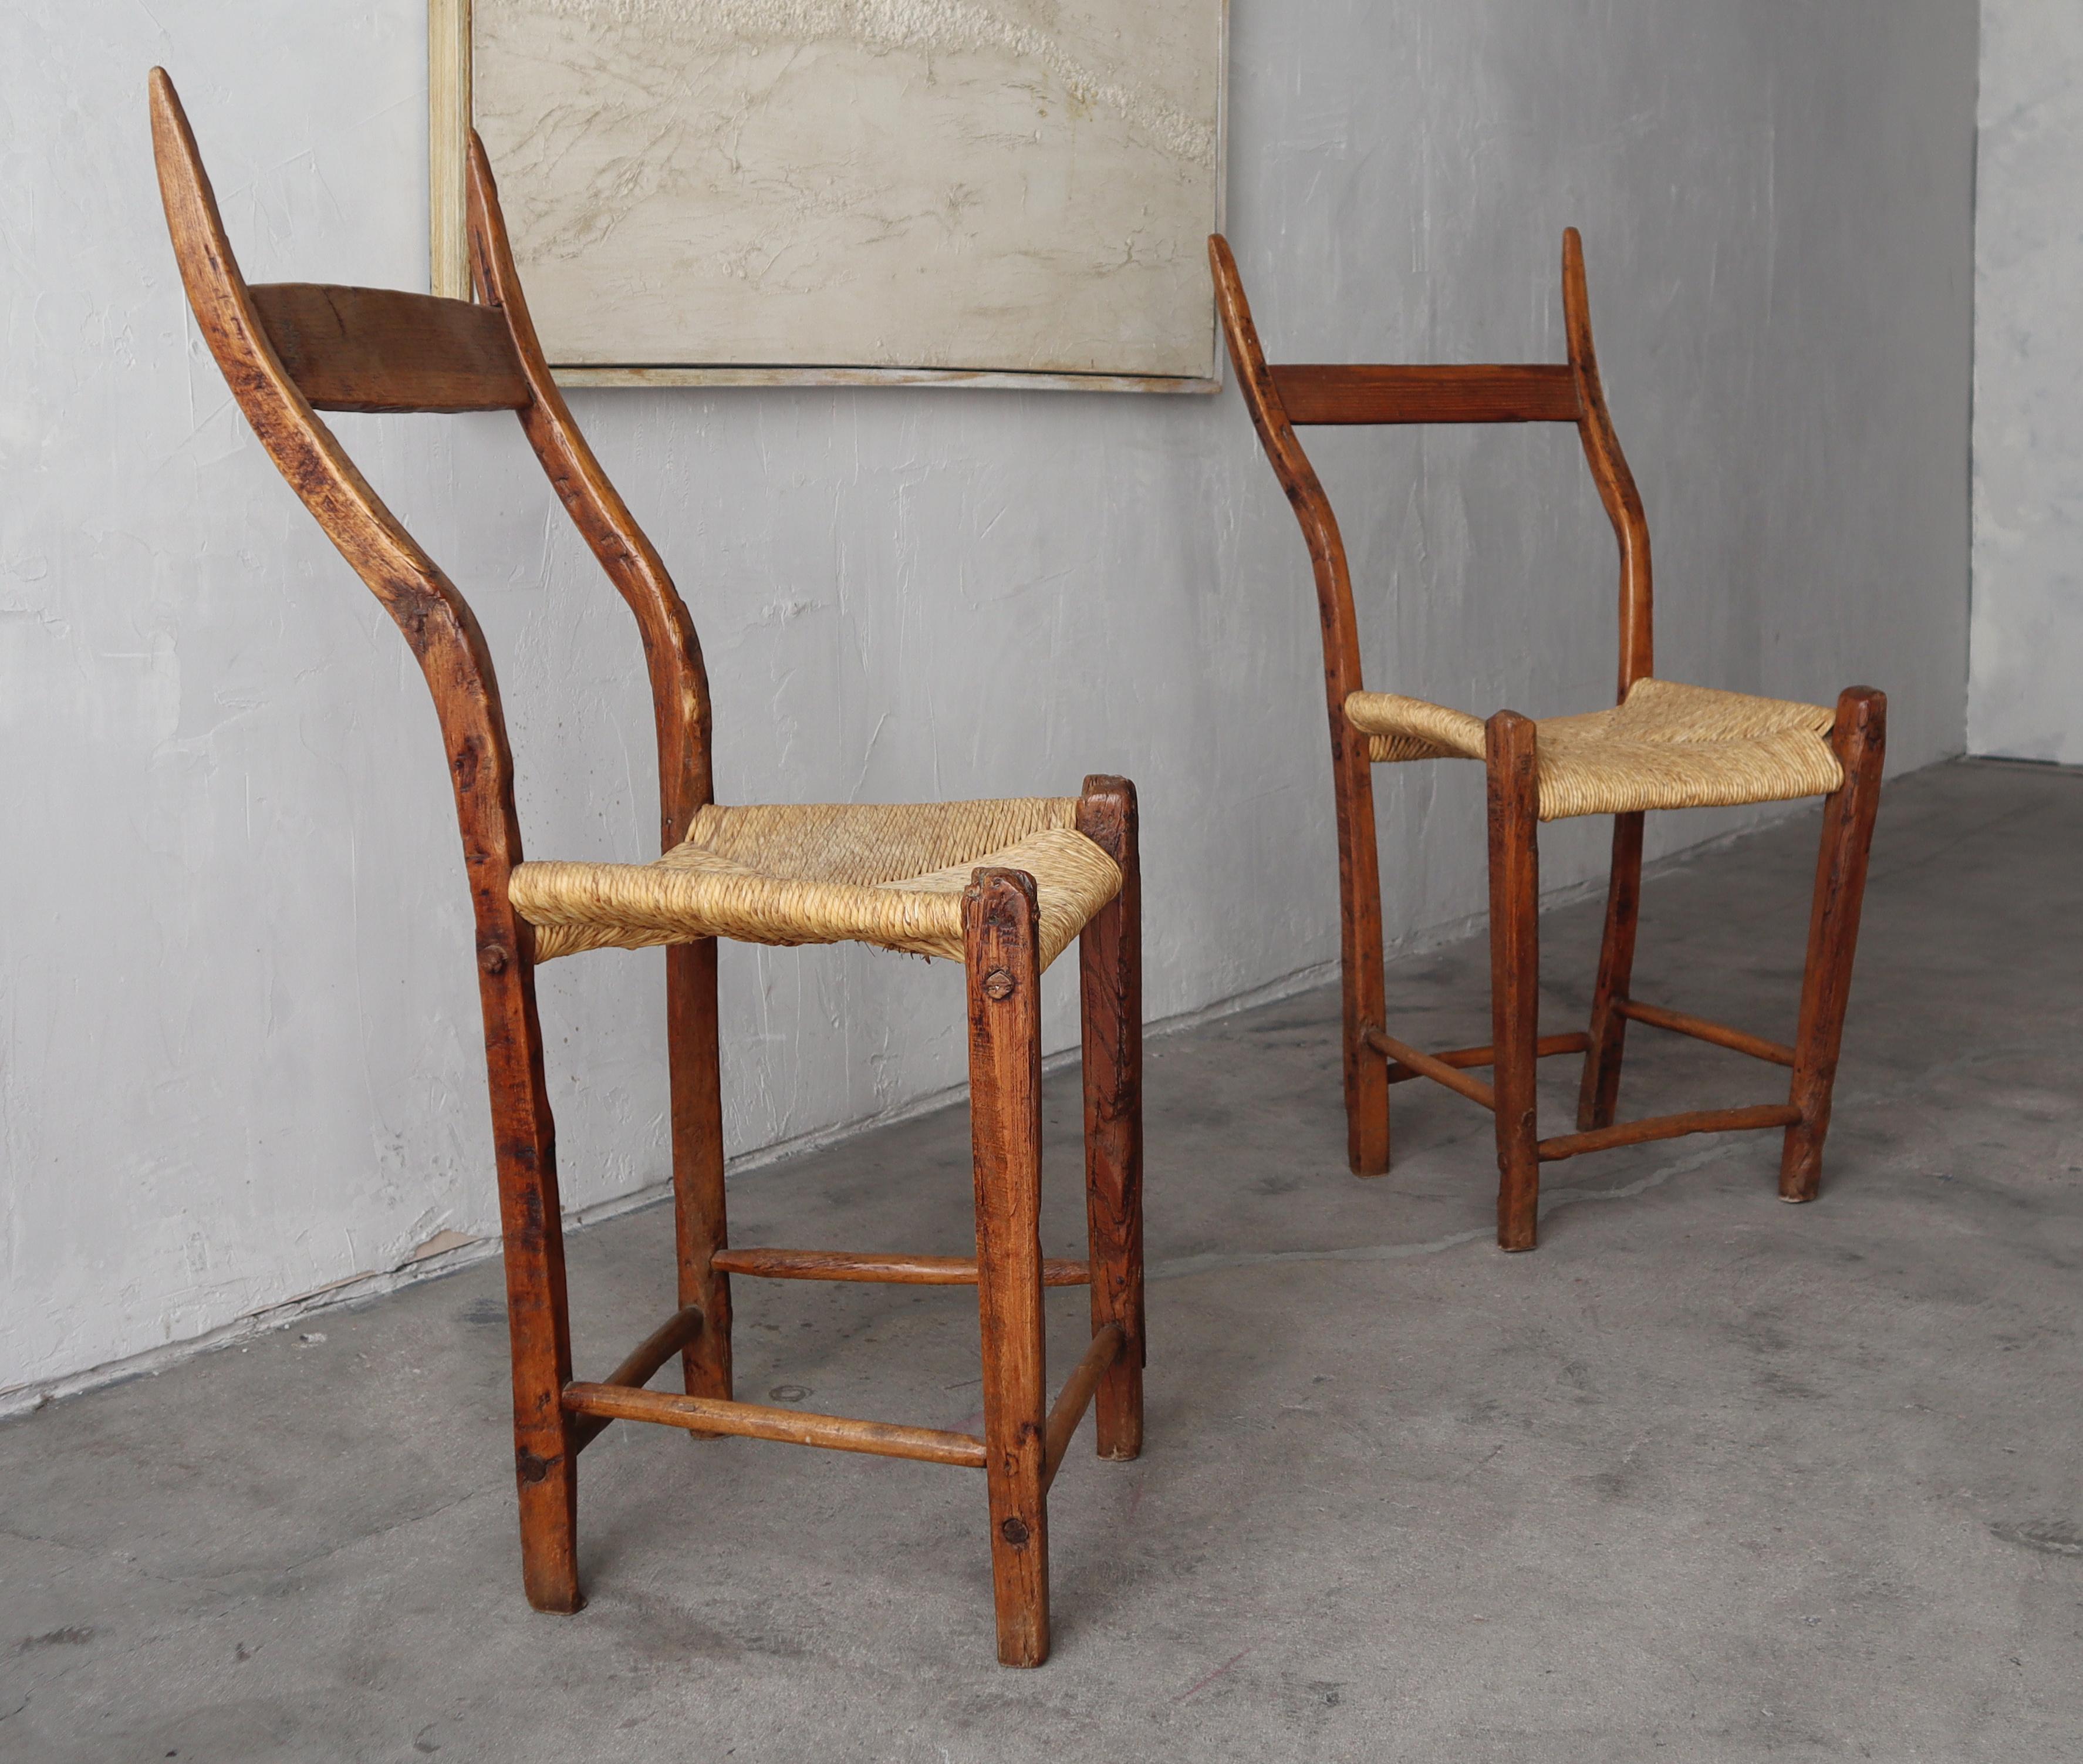 TWO CHAIRS AVAILABLE

Beautiful chairs full of Wabi-Sabi style. French craftsmanship, antique 1800's with rush seating and an imperfect wooden structure. The handmade craftsmanship details on these chairs is unmatched. 

Chairs are in excellent,